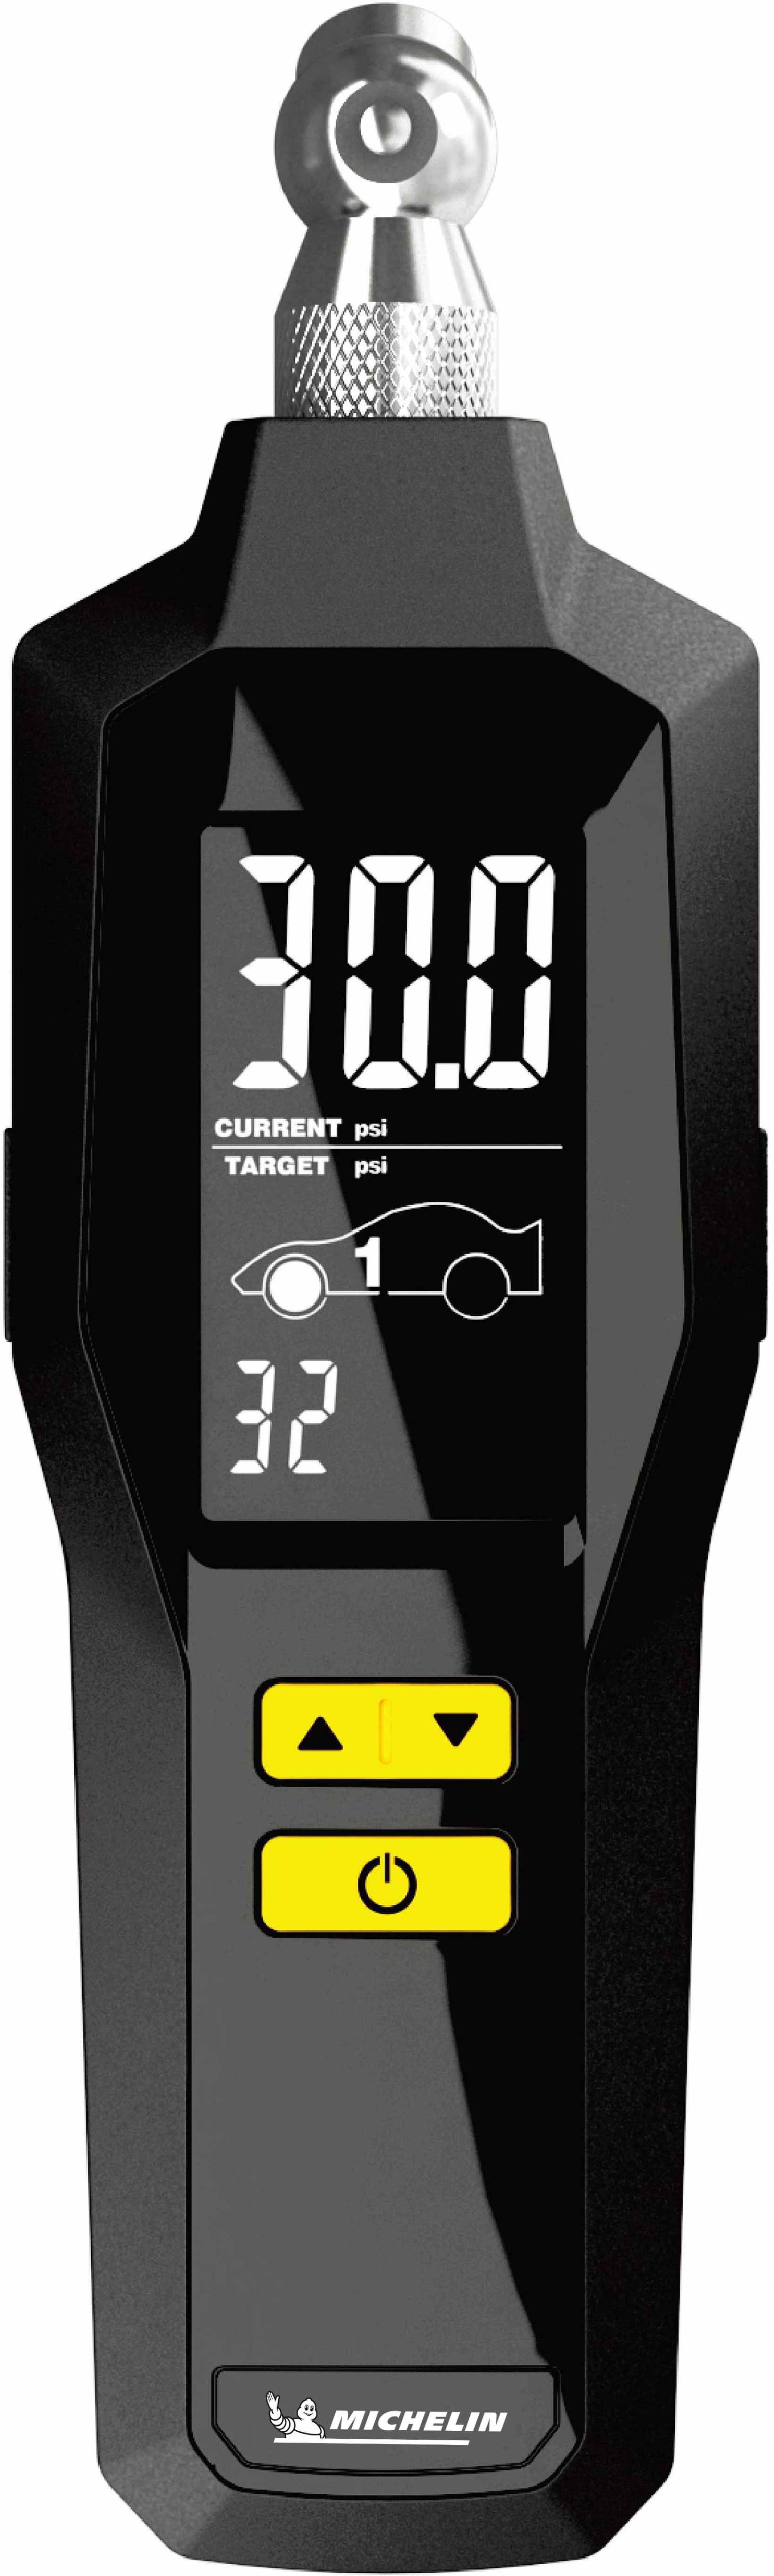 MICHELIN 12295 Programmable Dual Car Digital Tire Pressure Gauge with Flashlight and Bleed Valve 